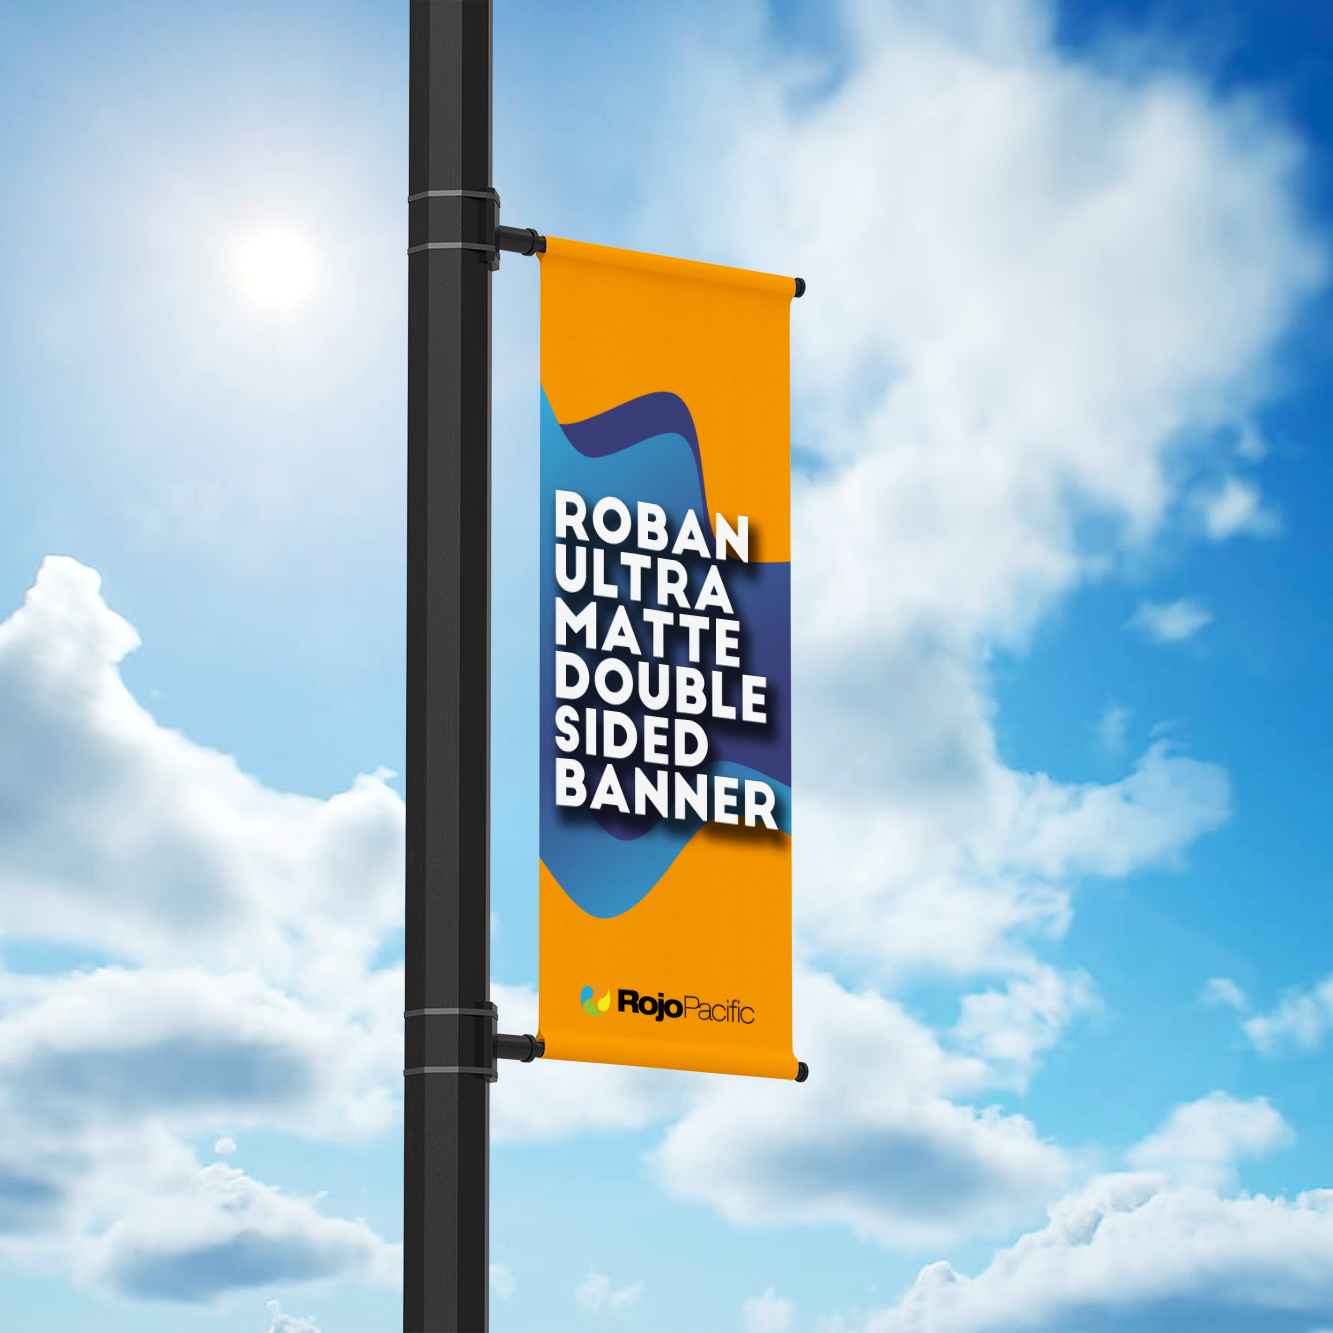 Roban Ultra Matte Double Sided Banner